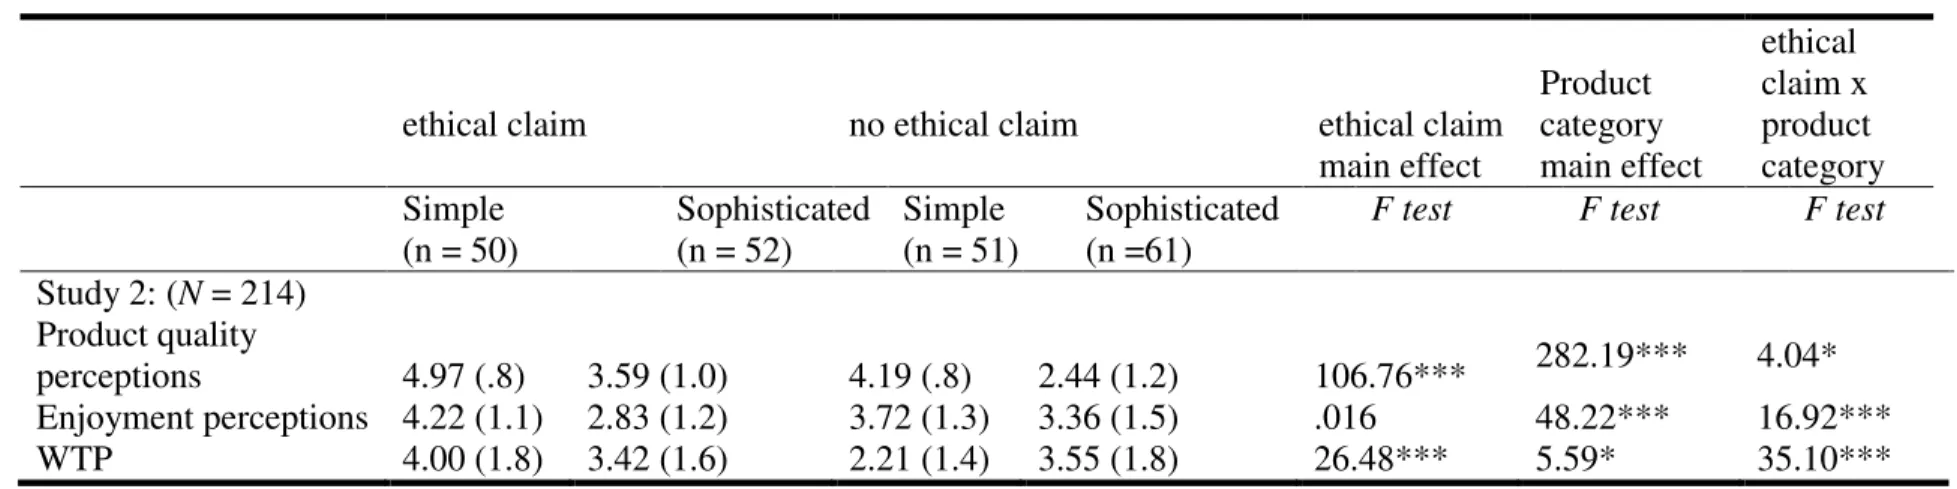 Table 3.1. The Impact of Ethical Claims on Simple versus Sophisticated Product Categories’ Evaluations: Study 2 